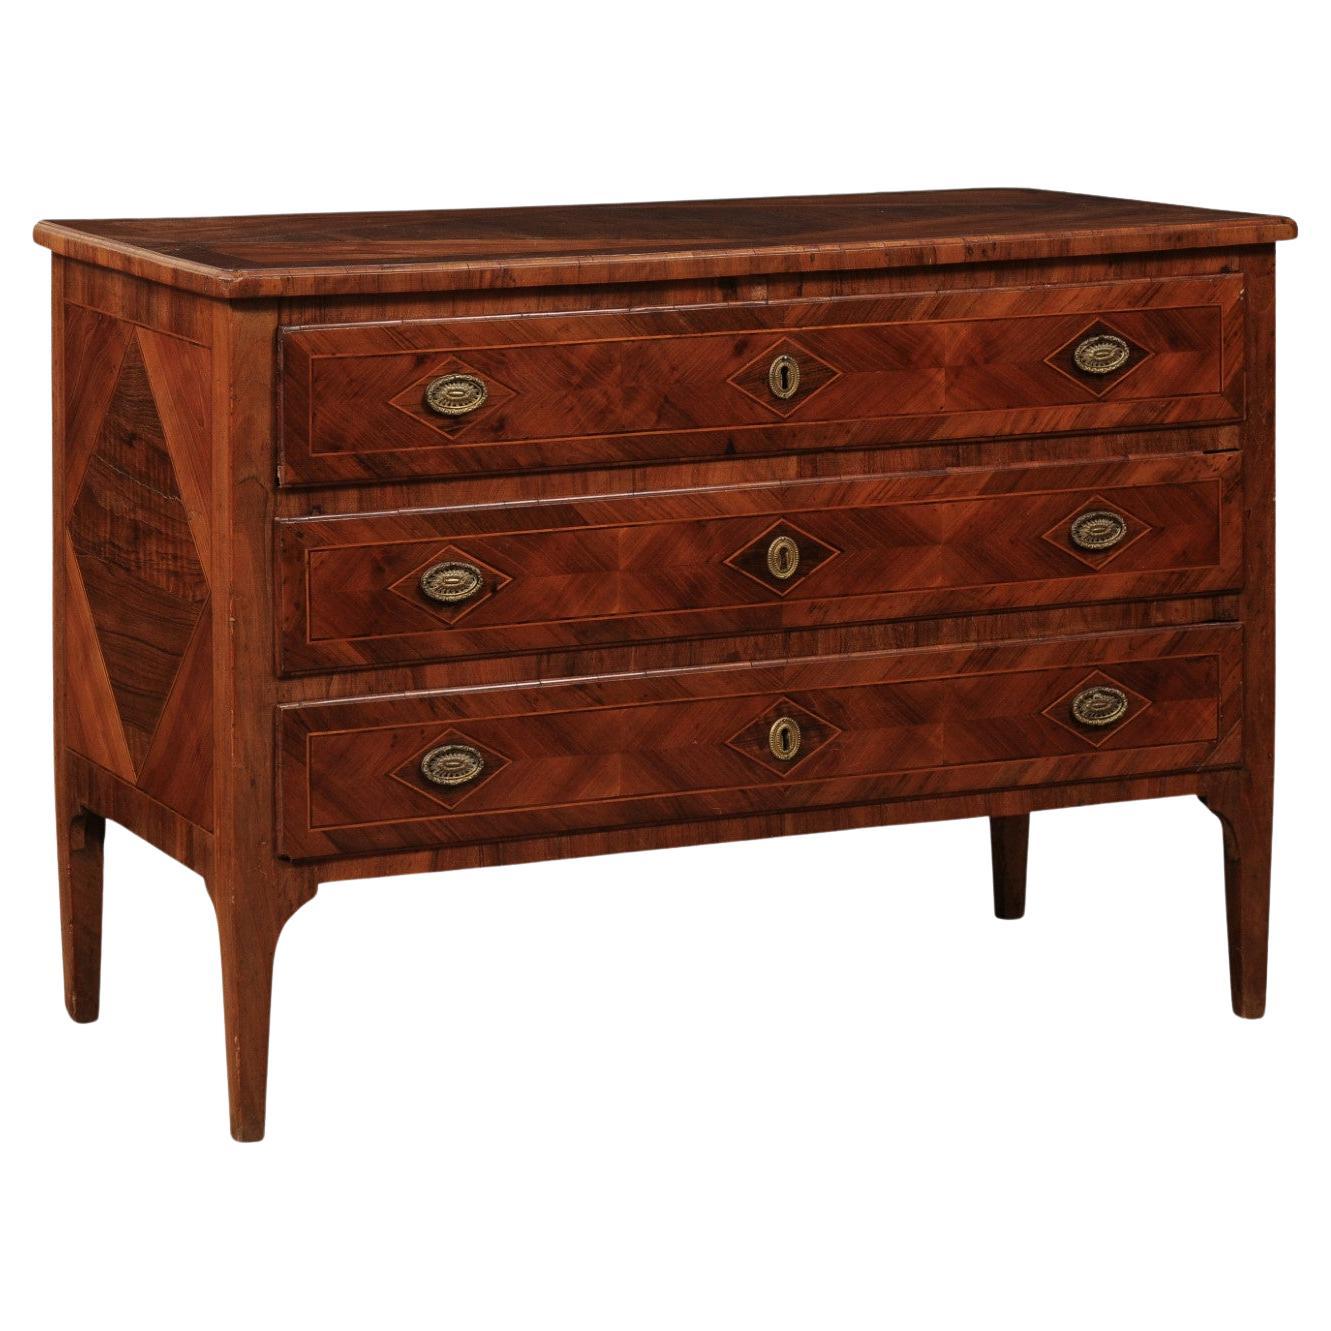 Late 18th Century Italian Neoclassical Parquetry Inlaid Walnut Commode with 3 Dr For Sale